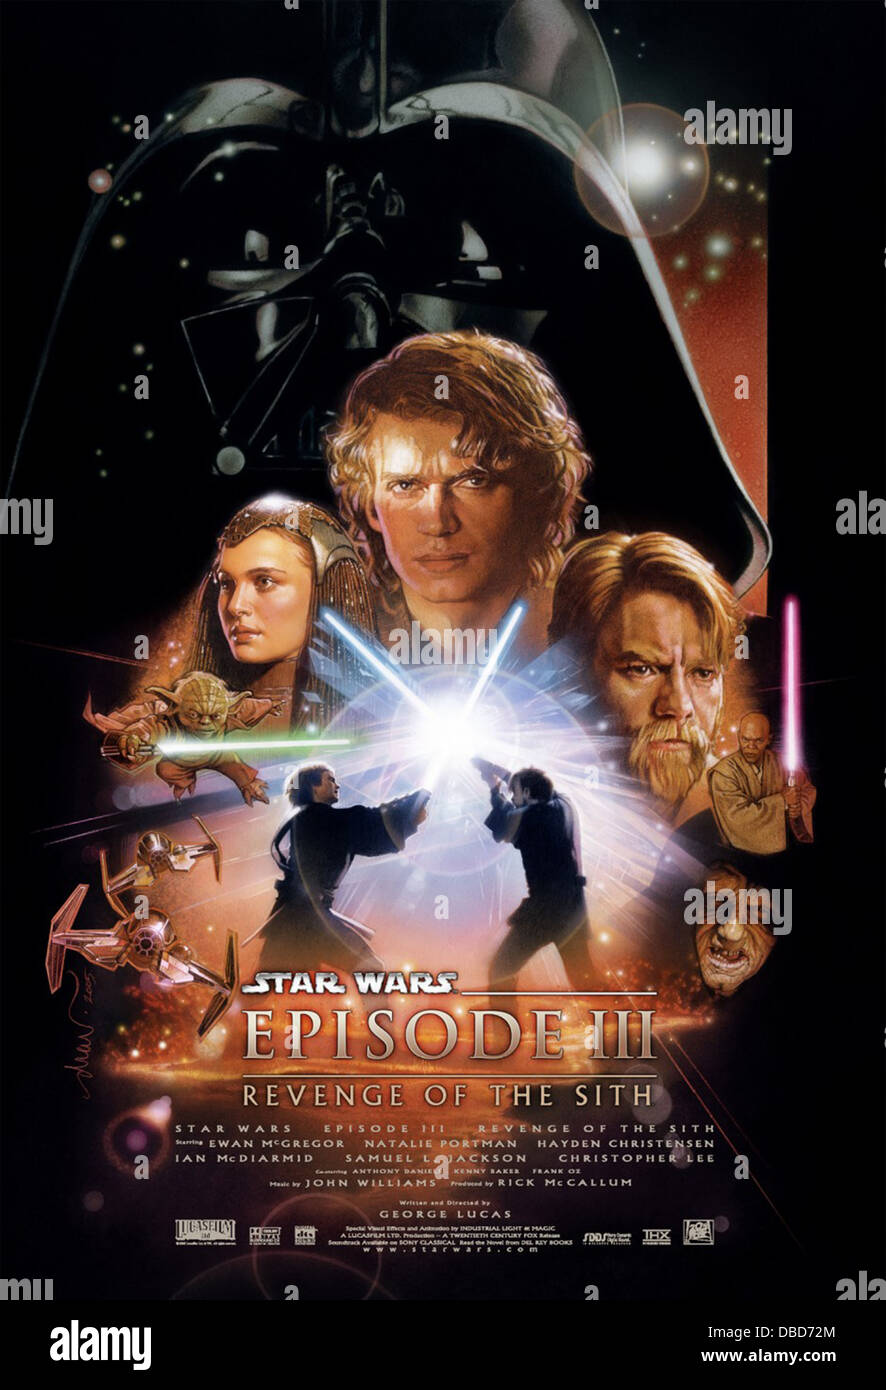 STAR WARS EPISODE III - REVENGE OF THE SITH (POSTER) (2005) GEORGE LUCAS (DIR) 008 MOVIESTORE COLLECTION LTD Stock Photo